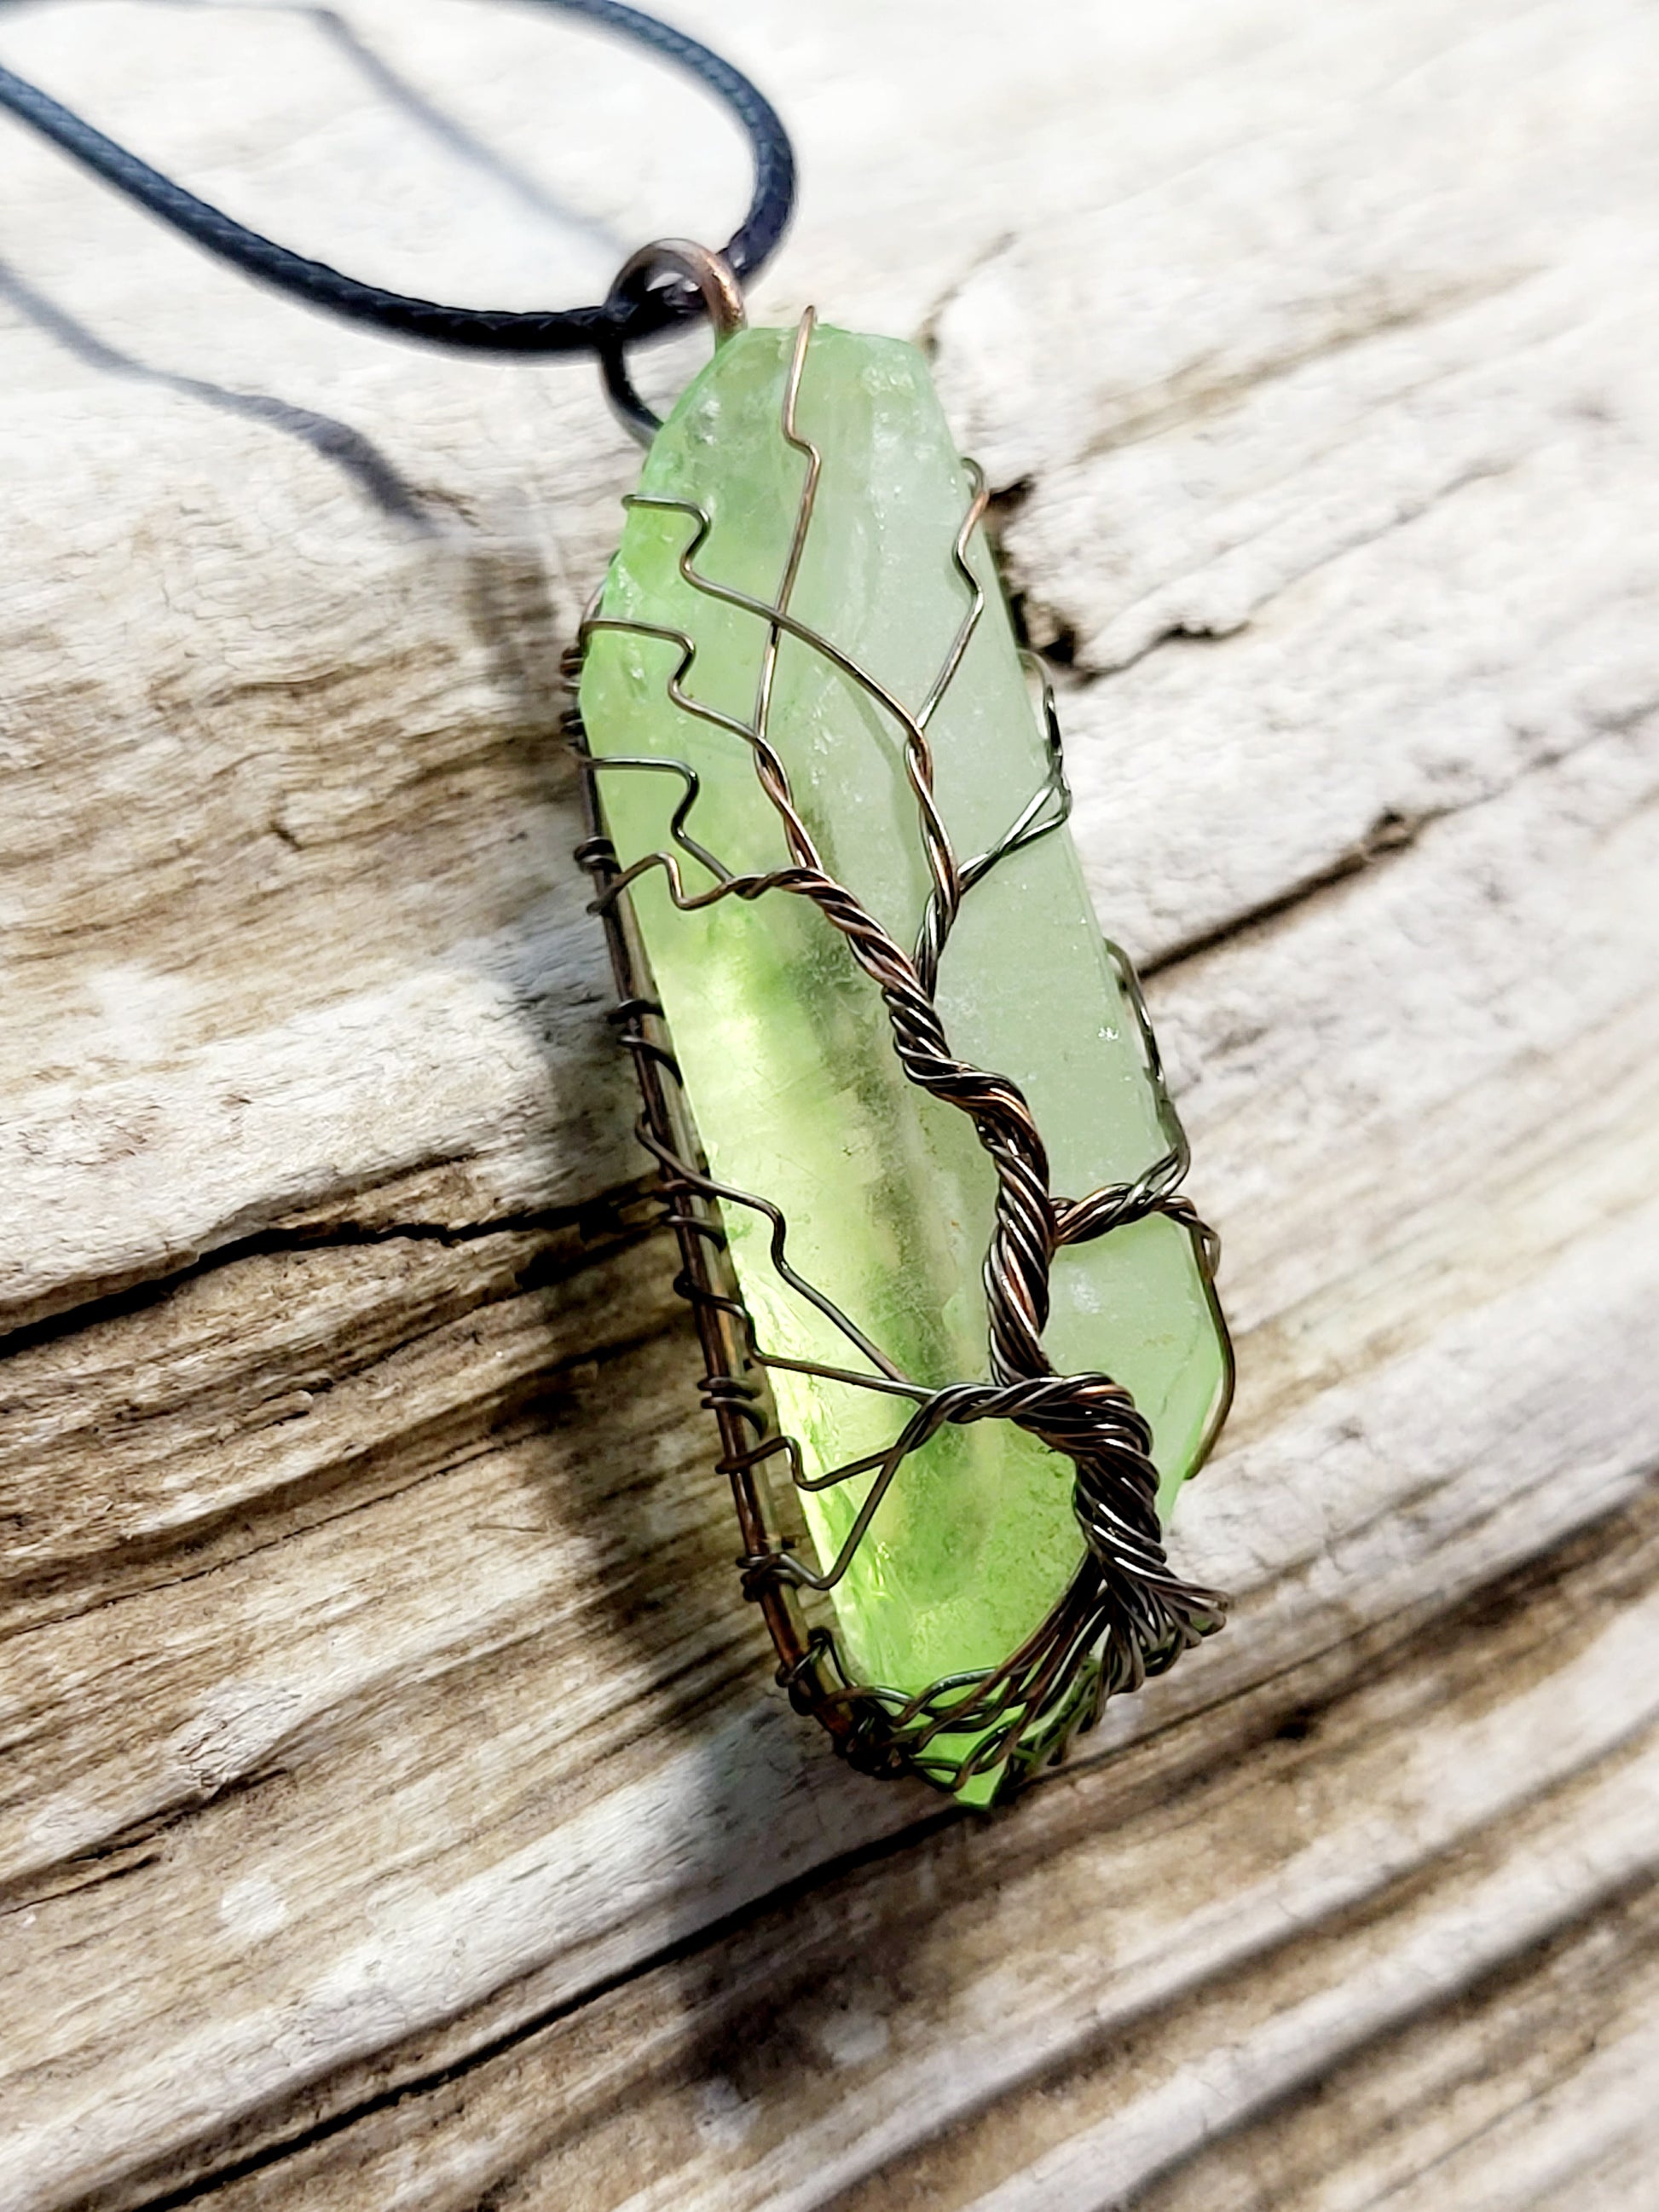 Tourmaline (green) crystal in Quartz pendant for necklace healing crystal -  Crystal Concentrics